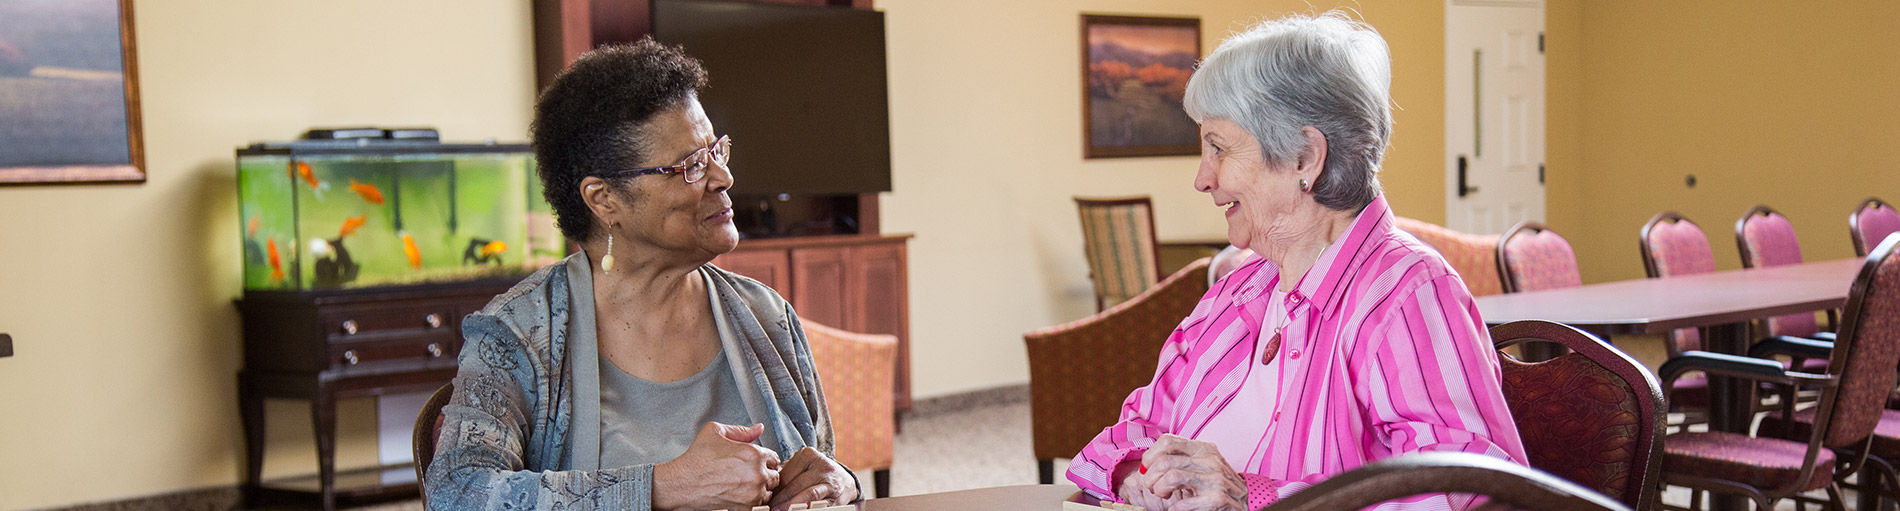 Senior Living Activities and Opportunities in MN